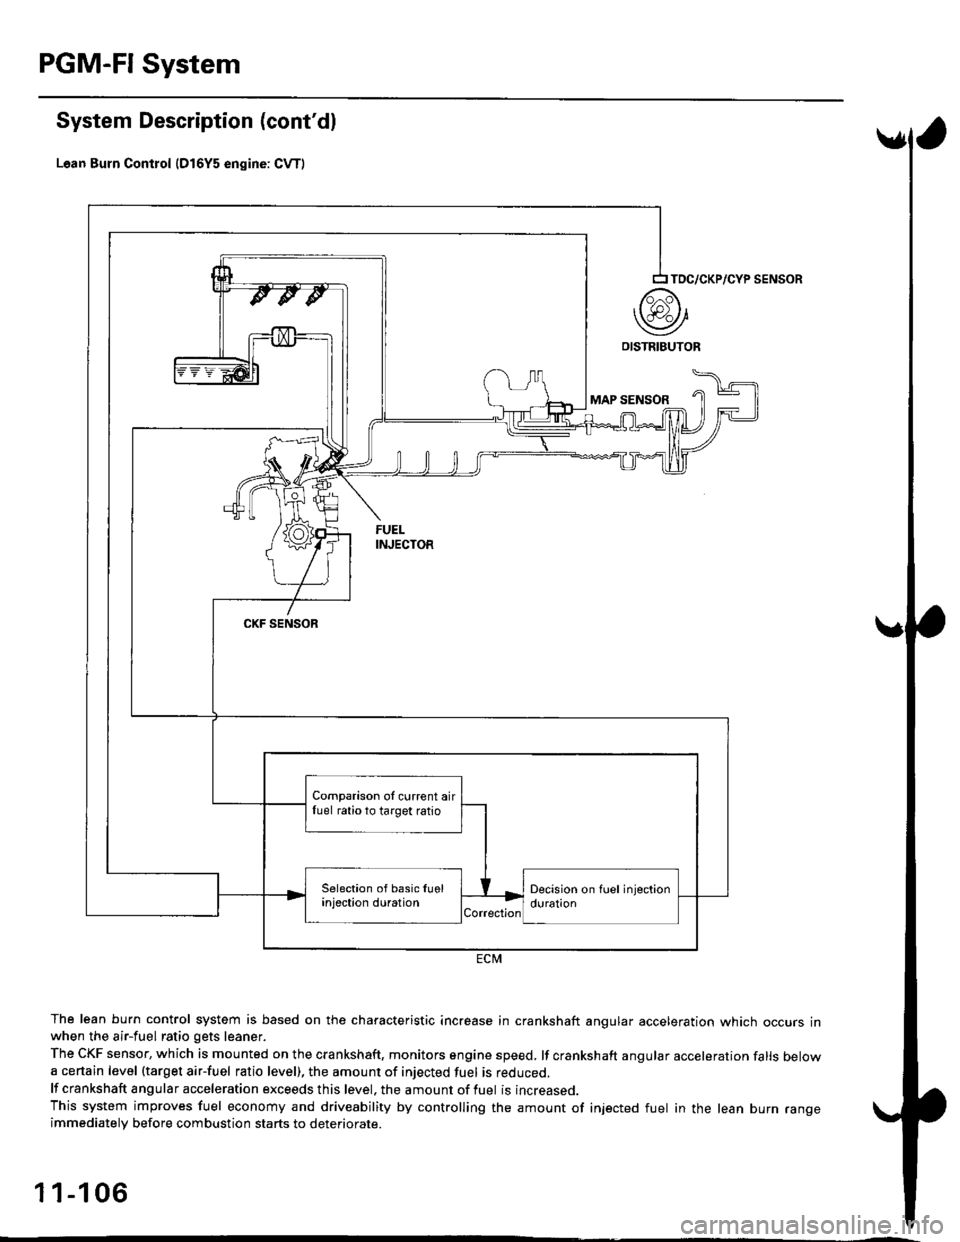 HONDA CIVIC 1999 6.G User Guide PGM-FI System
System Description (contdl
Lean Burn Control {D16Y5 engine: CvT)
The lean burn control system is based on the characteristic increase in crankshaft angular acceleration which occurs inw